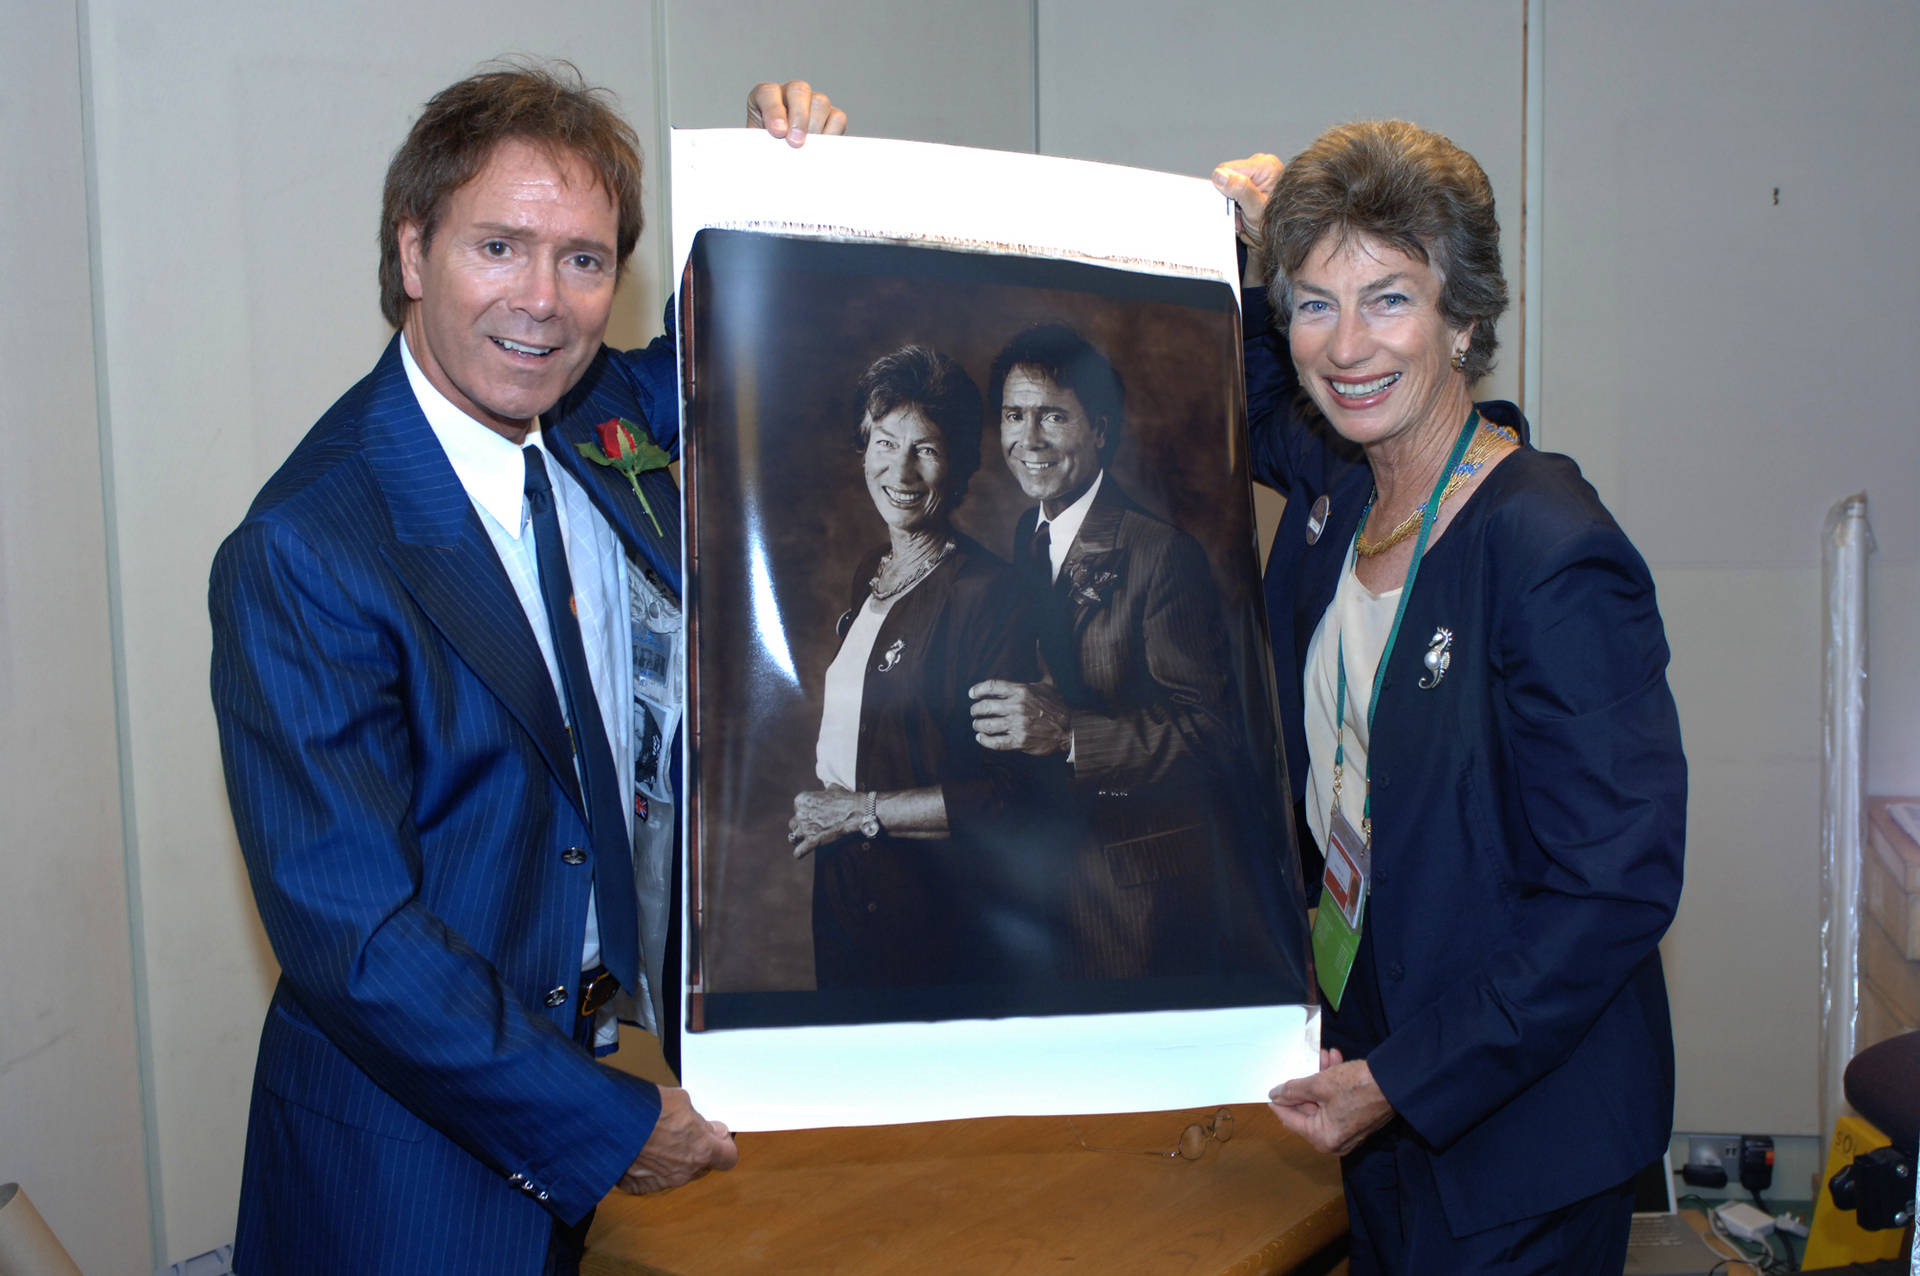 Virginia Wade and Cliff Richard at a Tennis Event Wallpaper